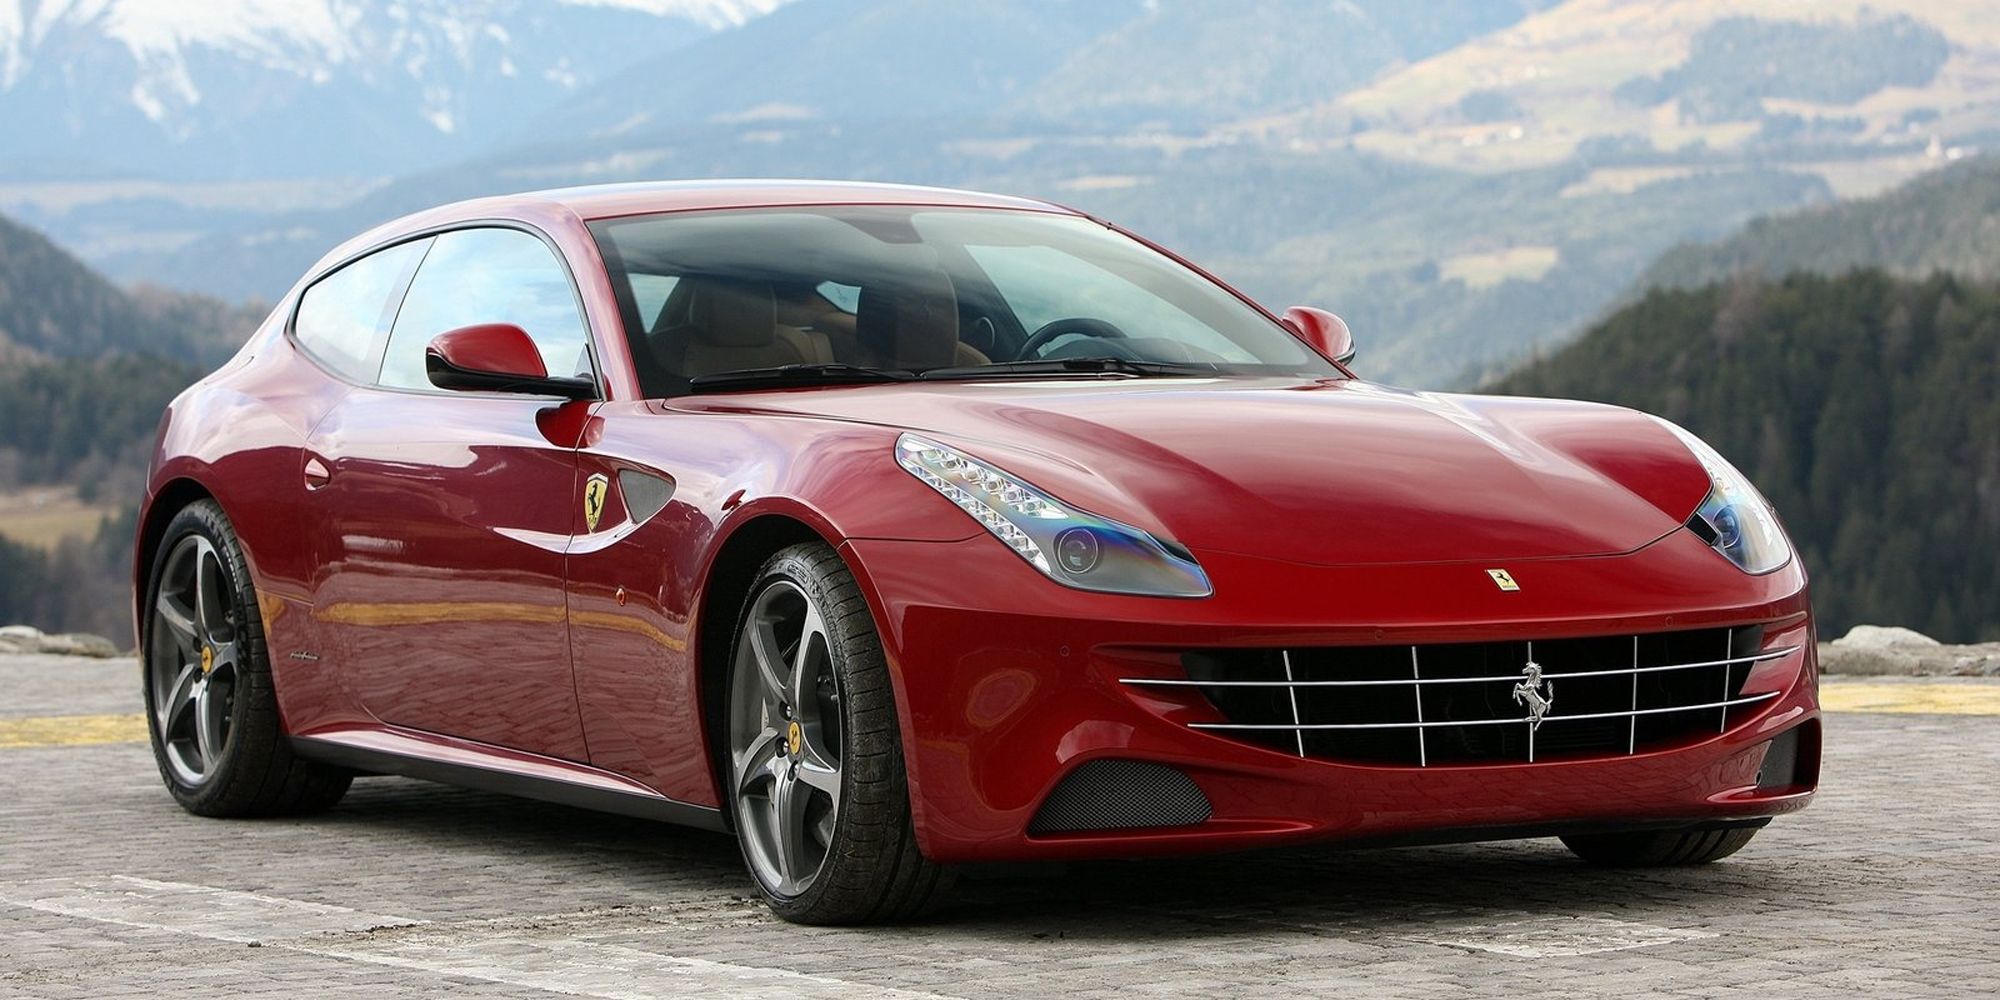 The front of the Ferrari FF